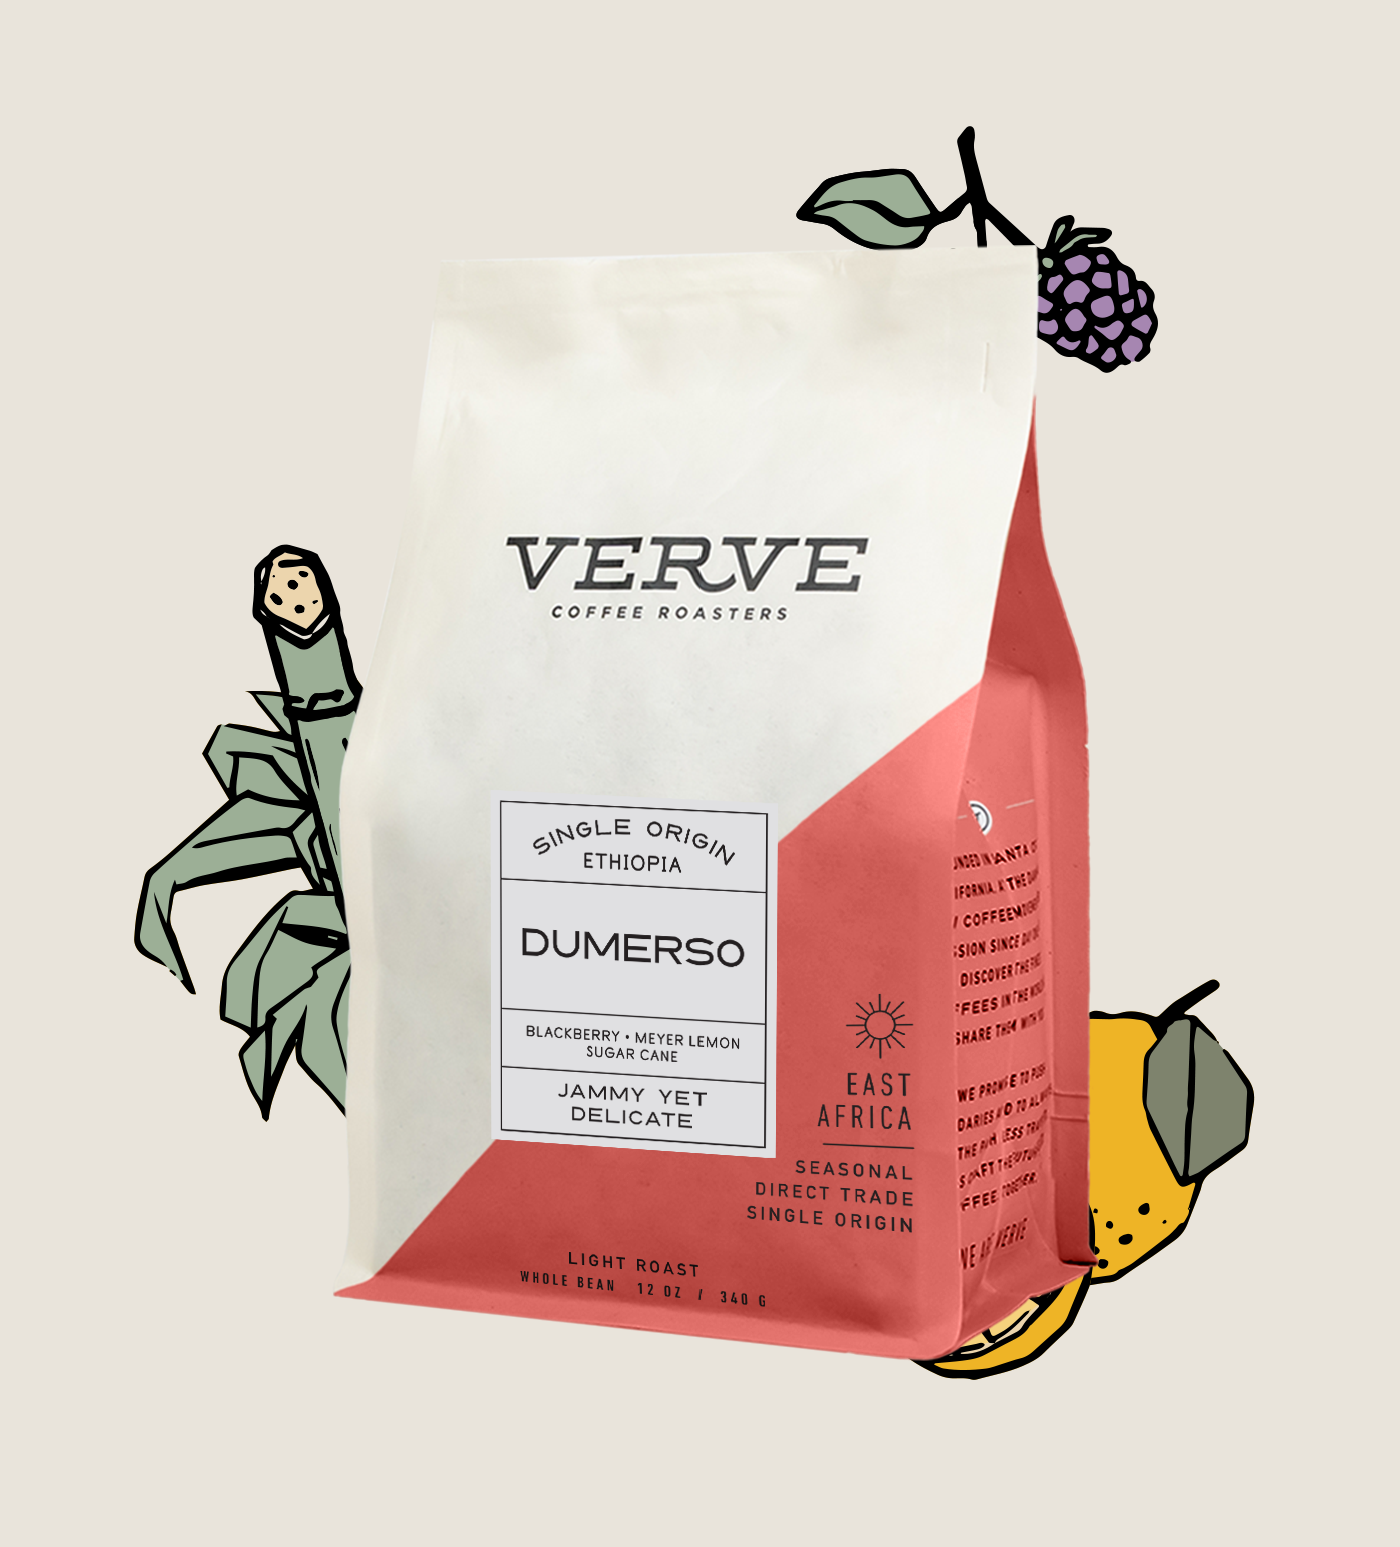 Dumerso Whole Bean with tasting notes